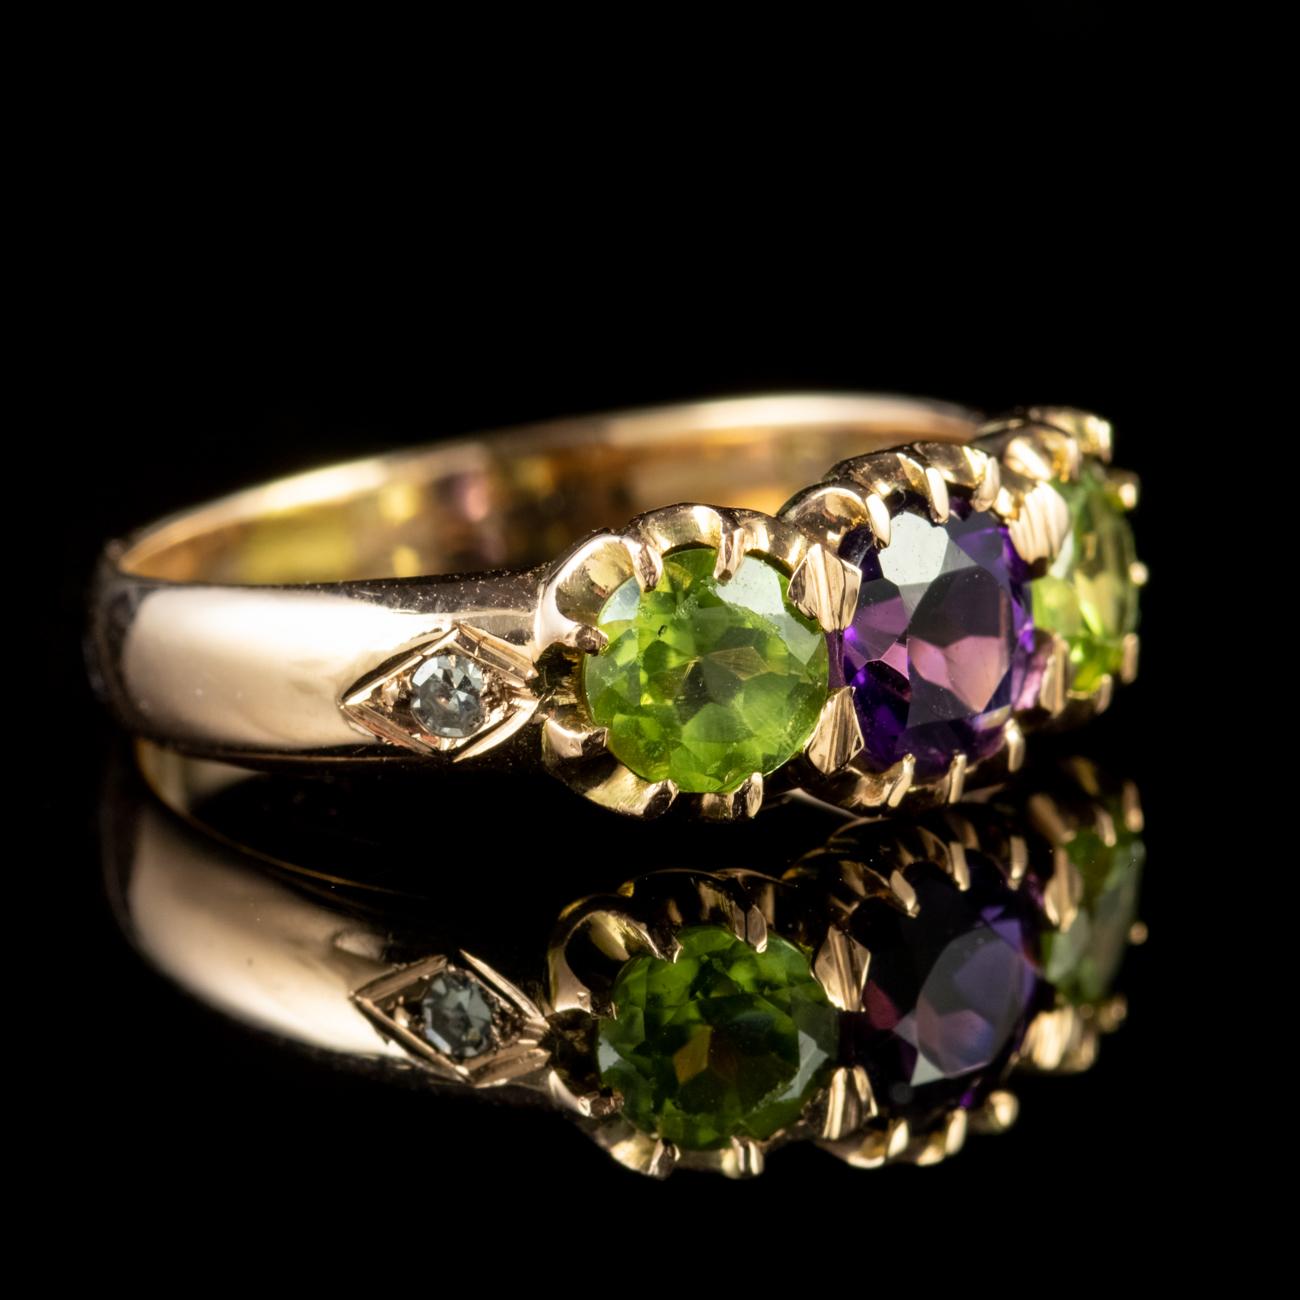 This exquisite 18ct Yellow Gold Edwardian Suffragette ring is a beautiful example of the jewellery worn to show allegiance to the Suffragette movement, and devotion to the cause of securing women’s rights.

Suffragette jewellery consisted of Violet,